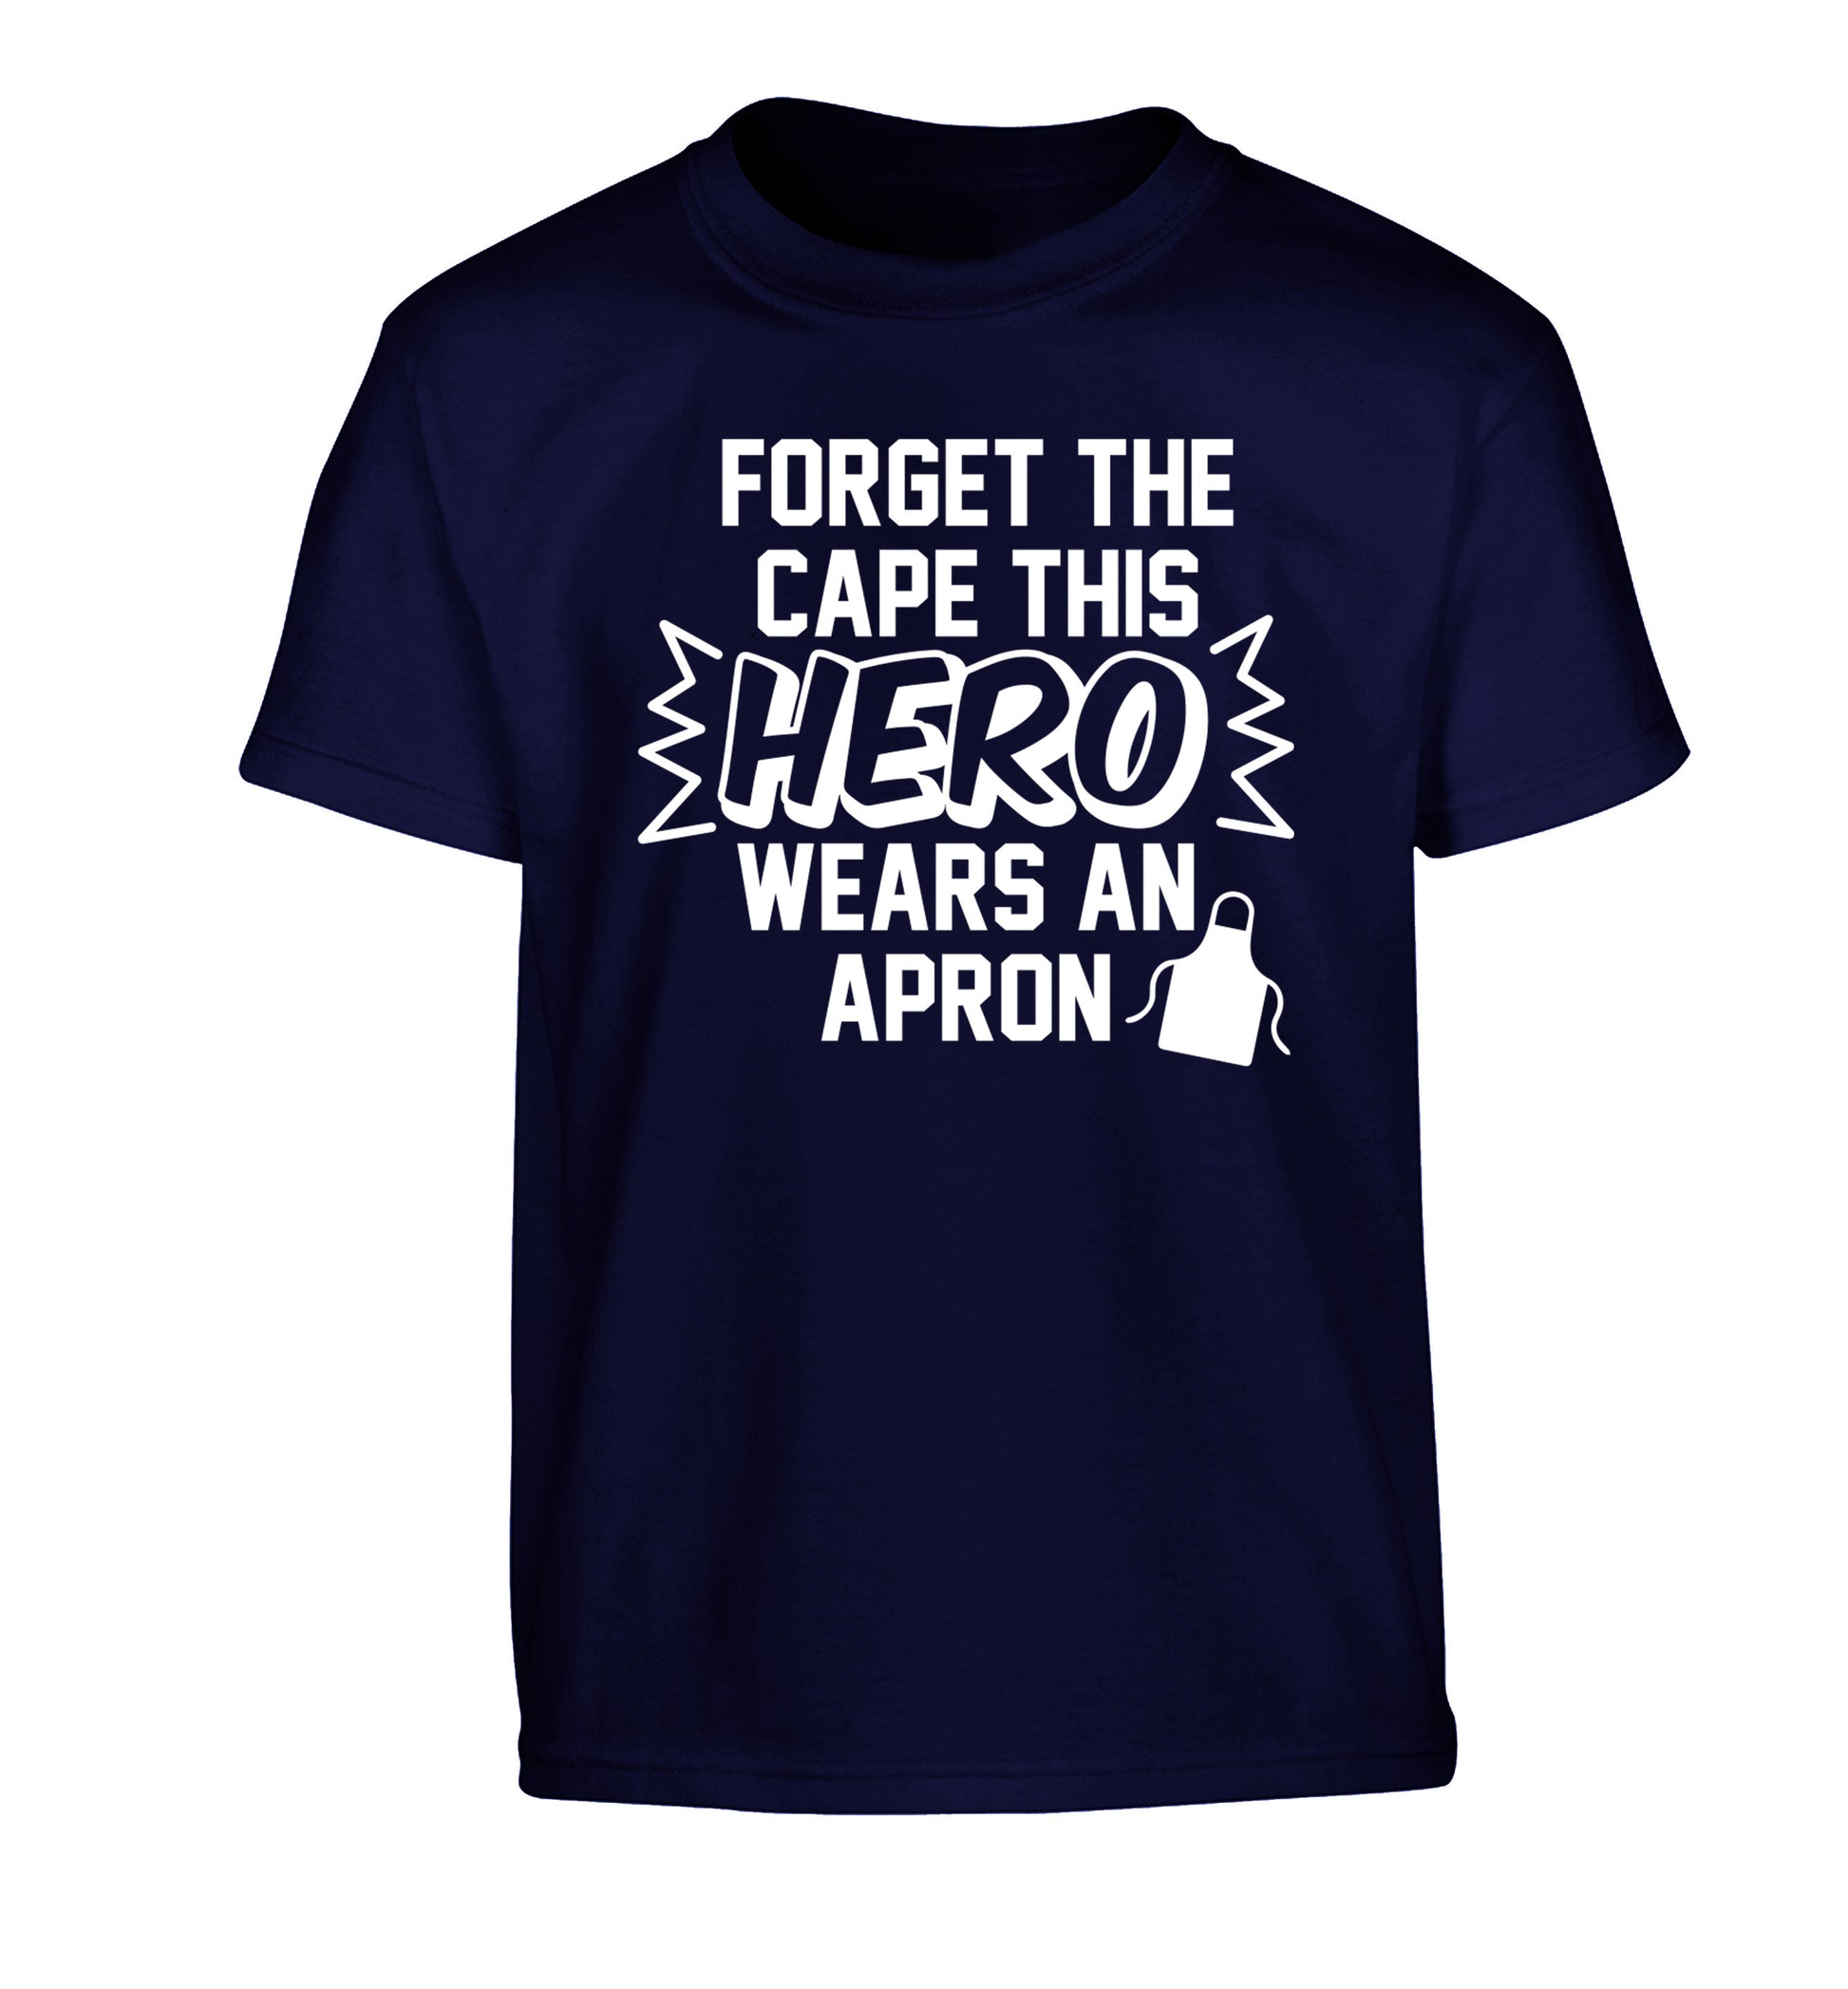 Forget the cape this hero wears an apron Children's navy Tshirt 12-14 Years